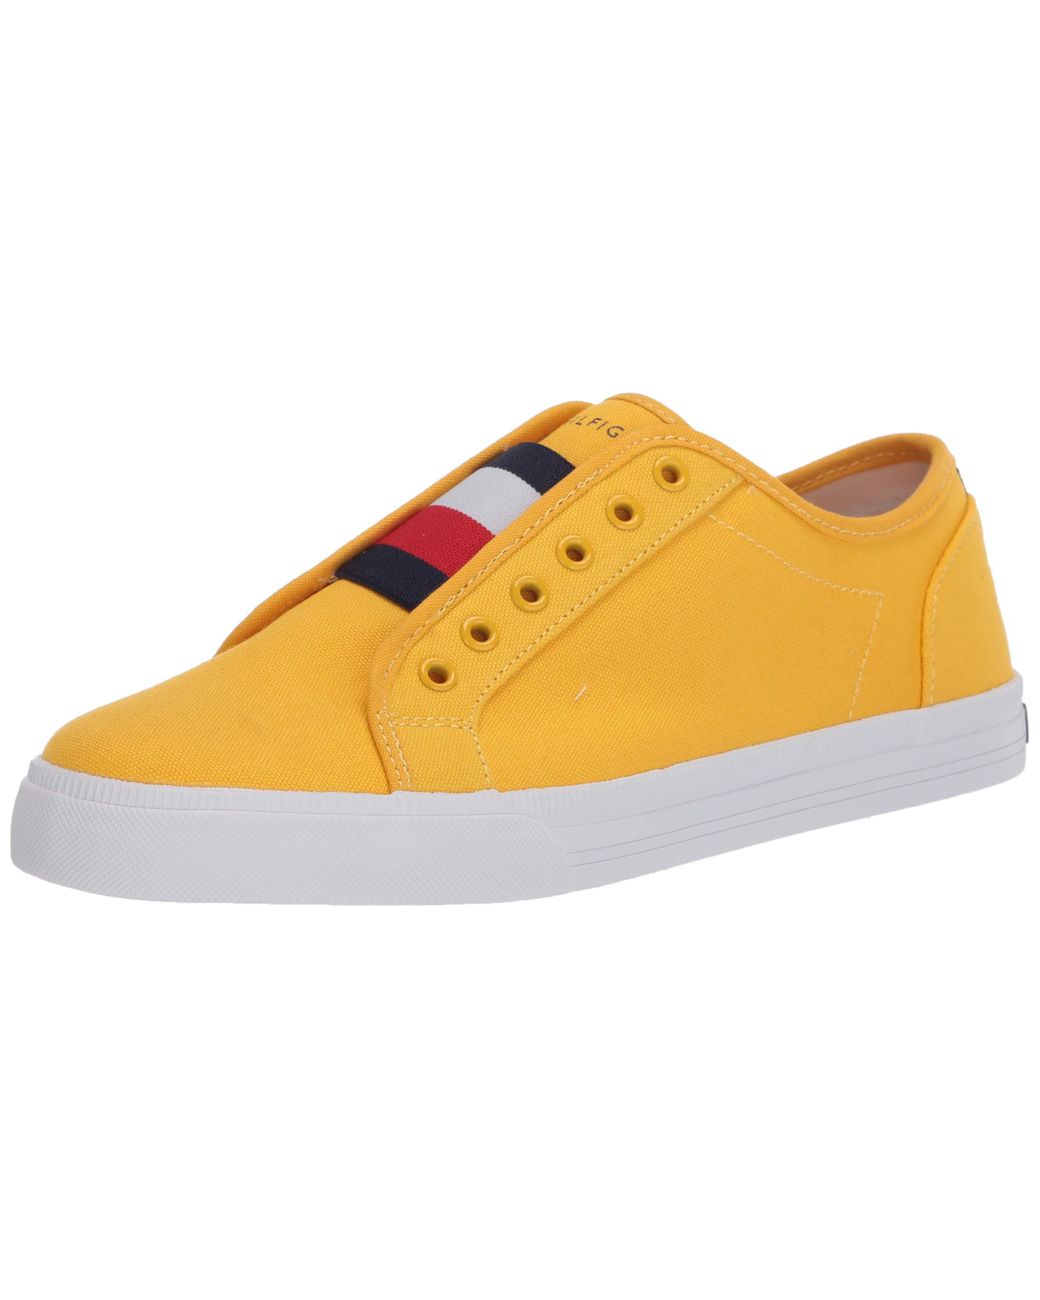 Tommy Hilfiger Anni Slip-on Sneaker in Yellow | Lyst